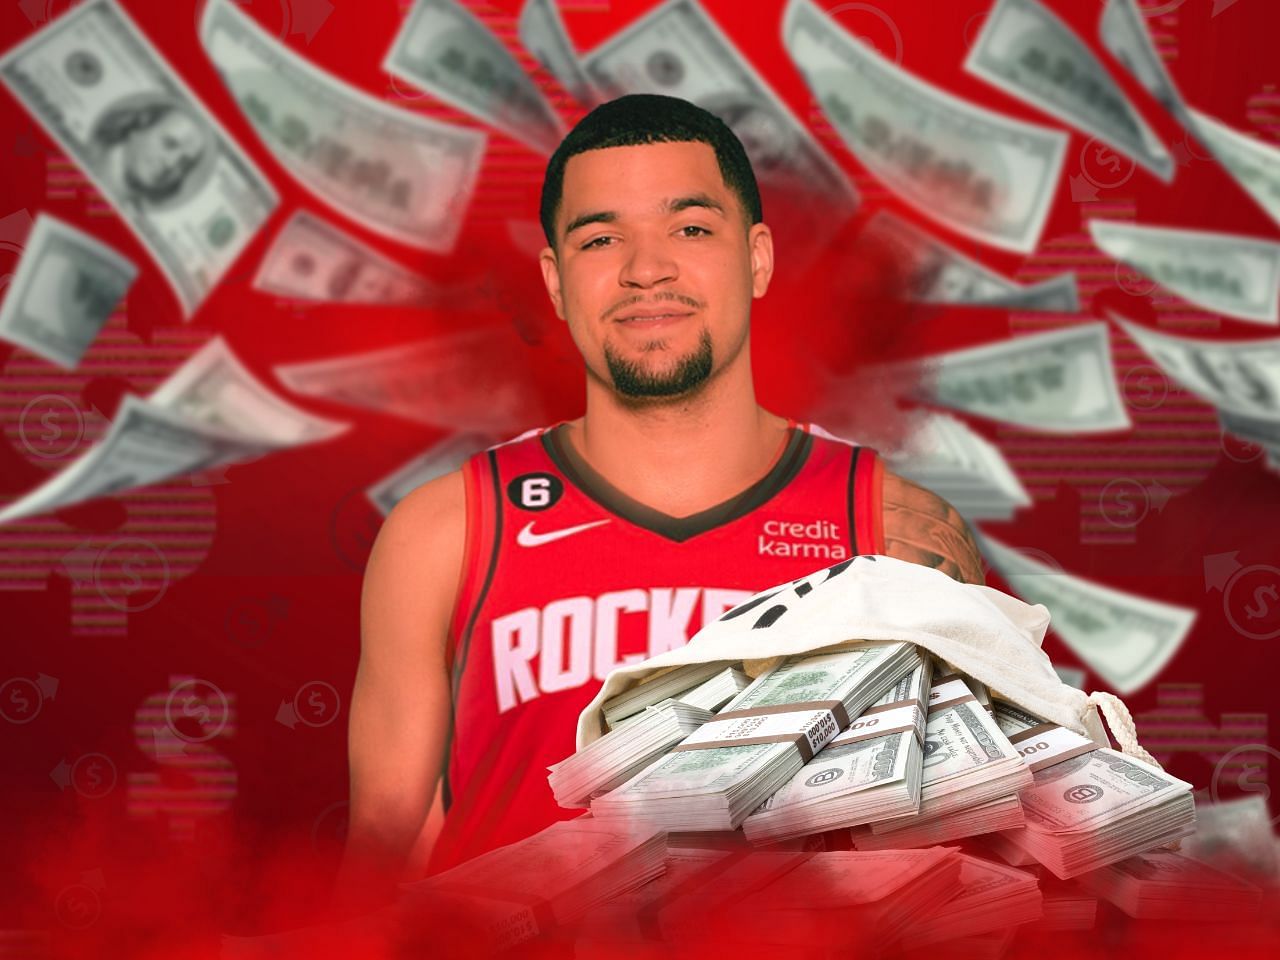 Fred VanVleet promises to live up to the expectatons after securing a huge payday with the Houston Rockets